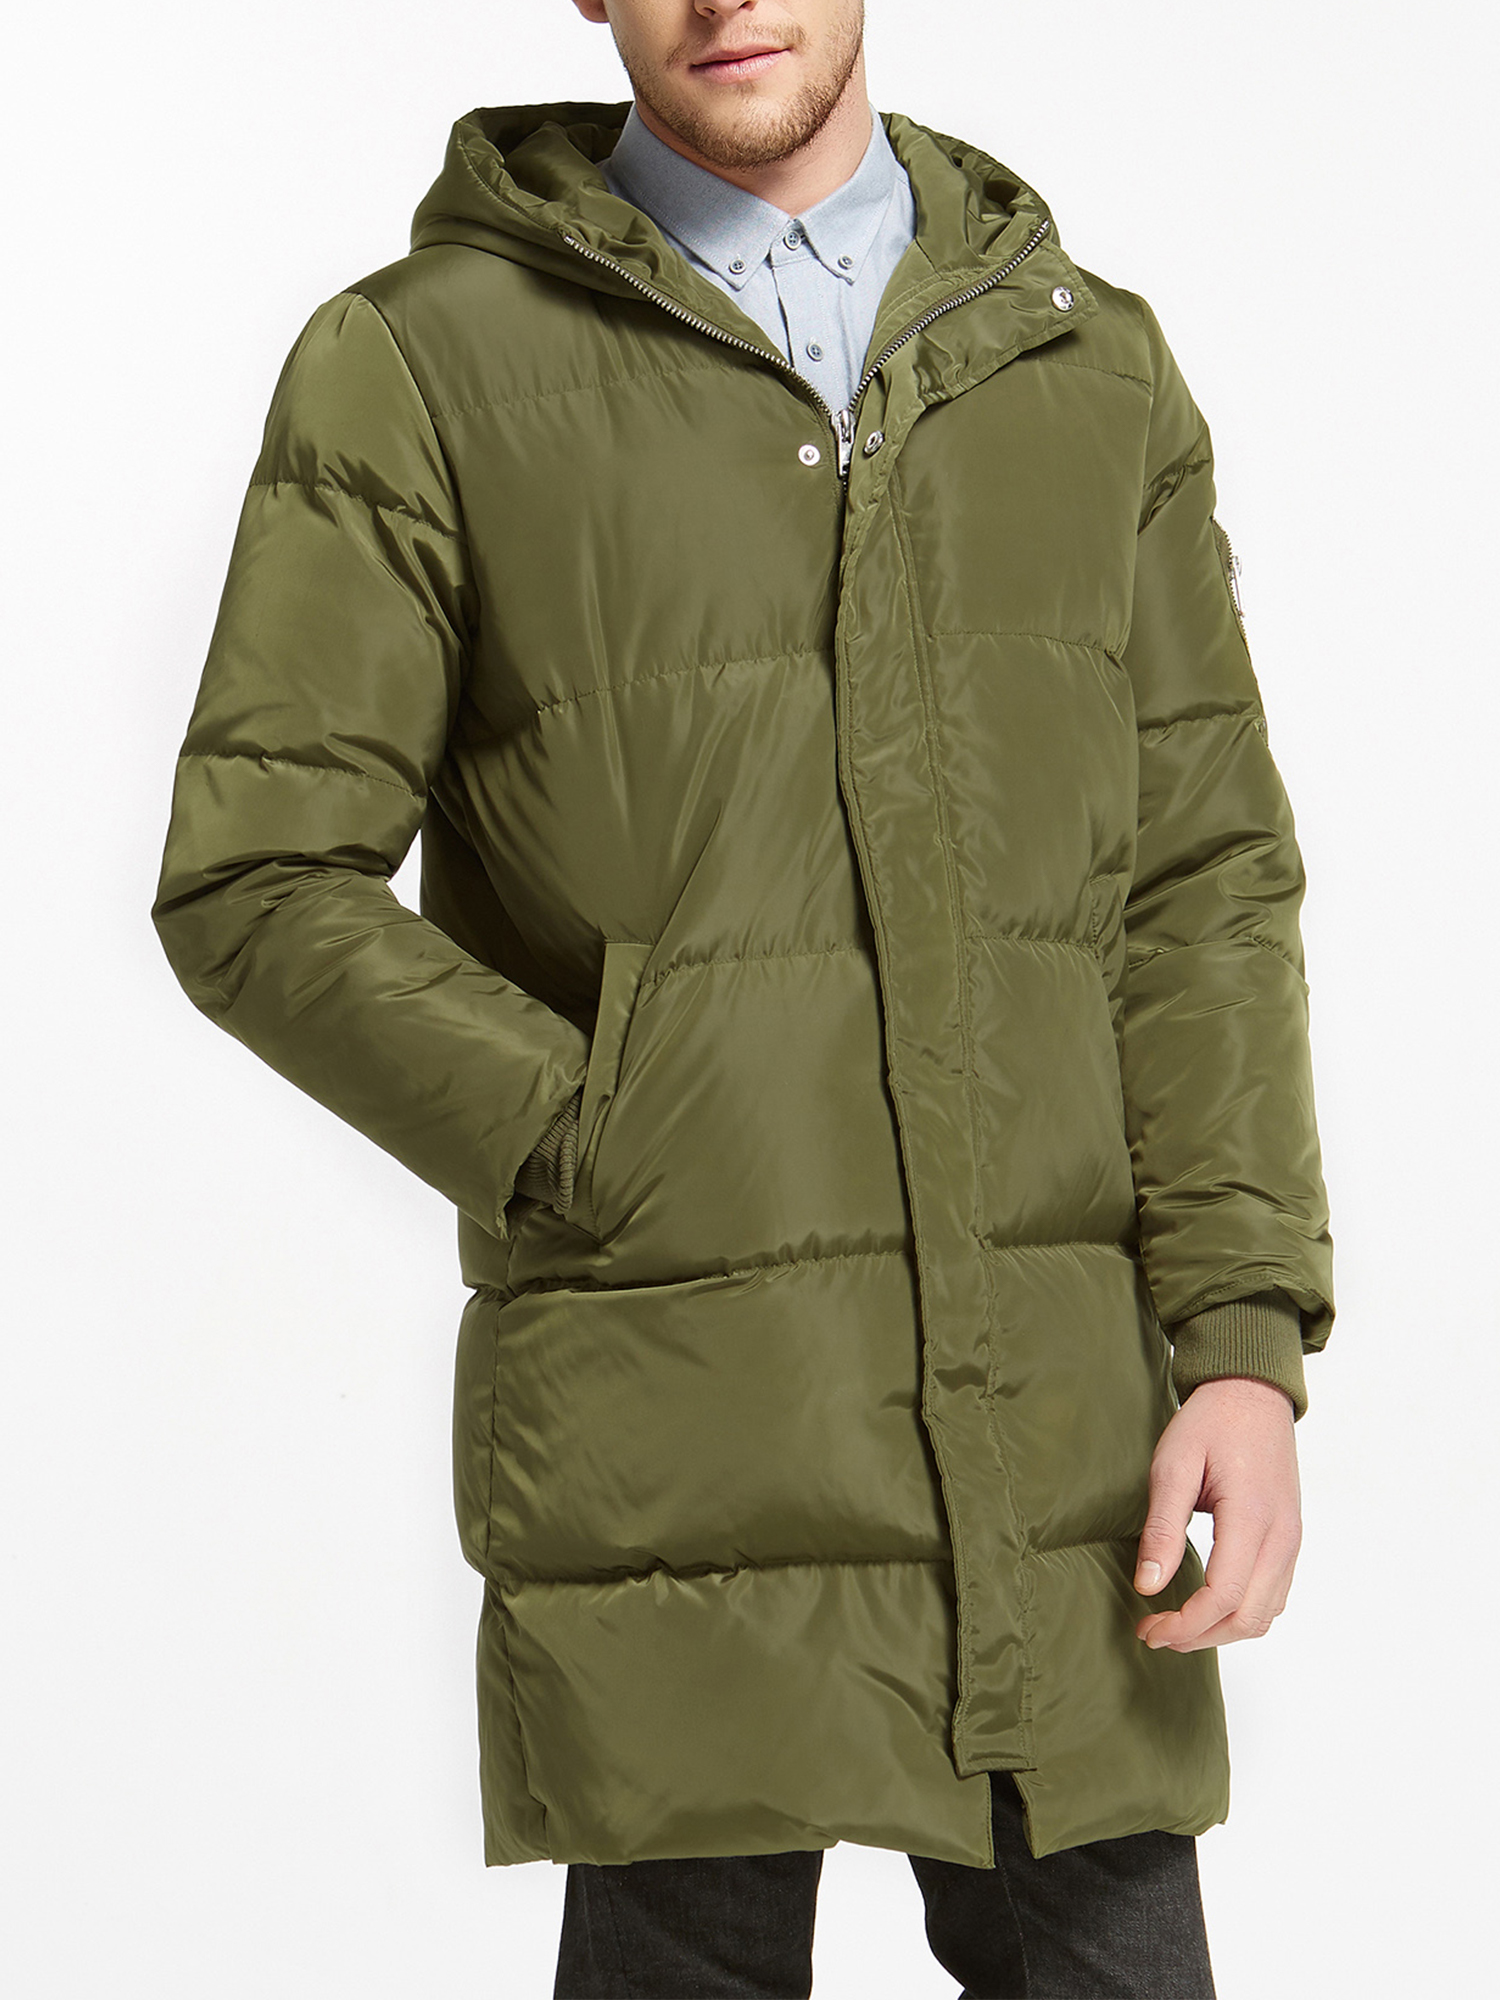 Orolay Men's Winter Down Jacket Down Puffer Jacket Plus Size - image 3 of 5